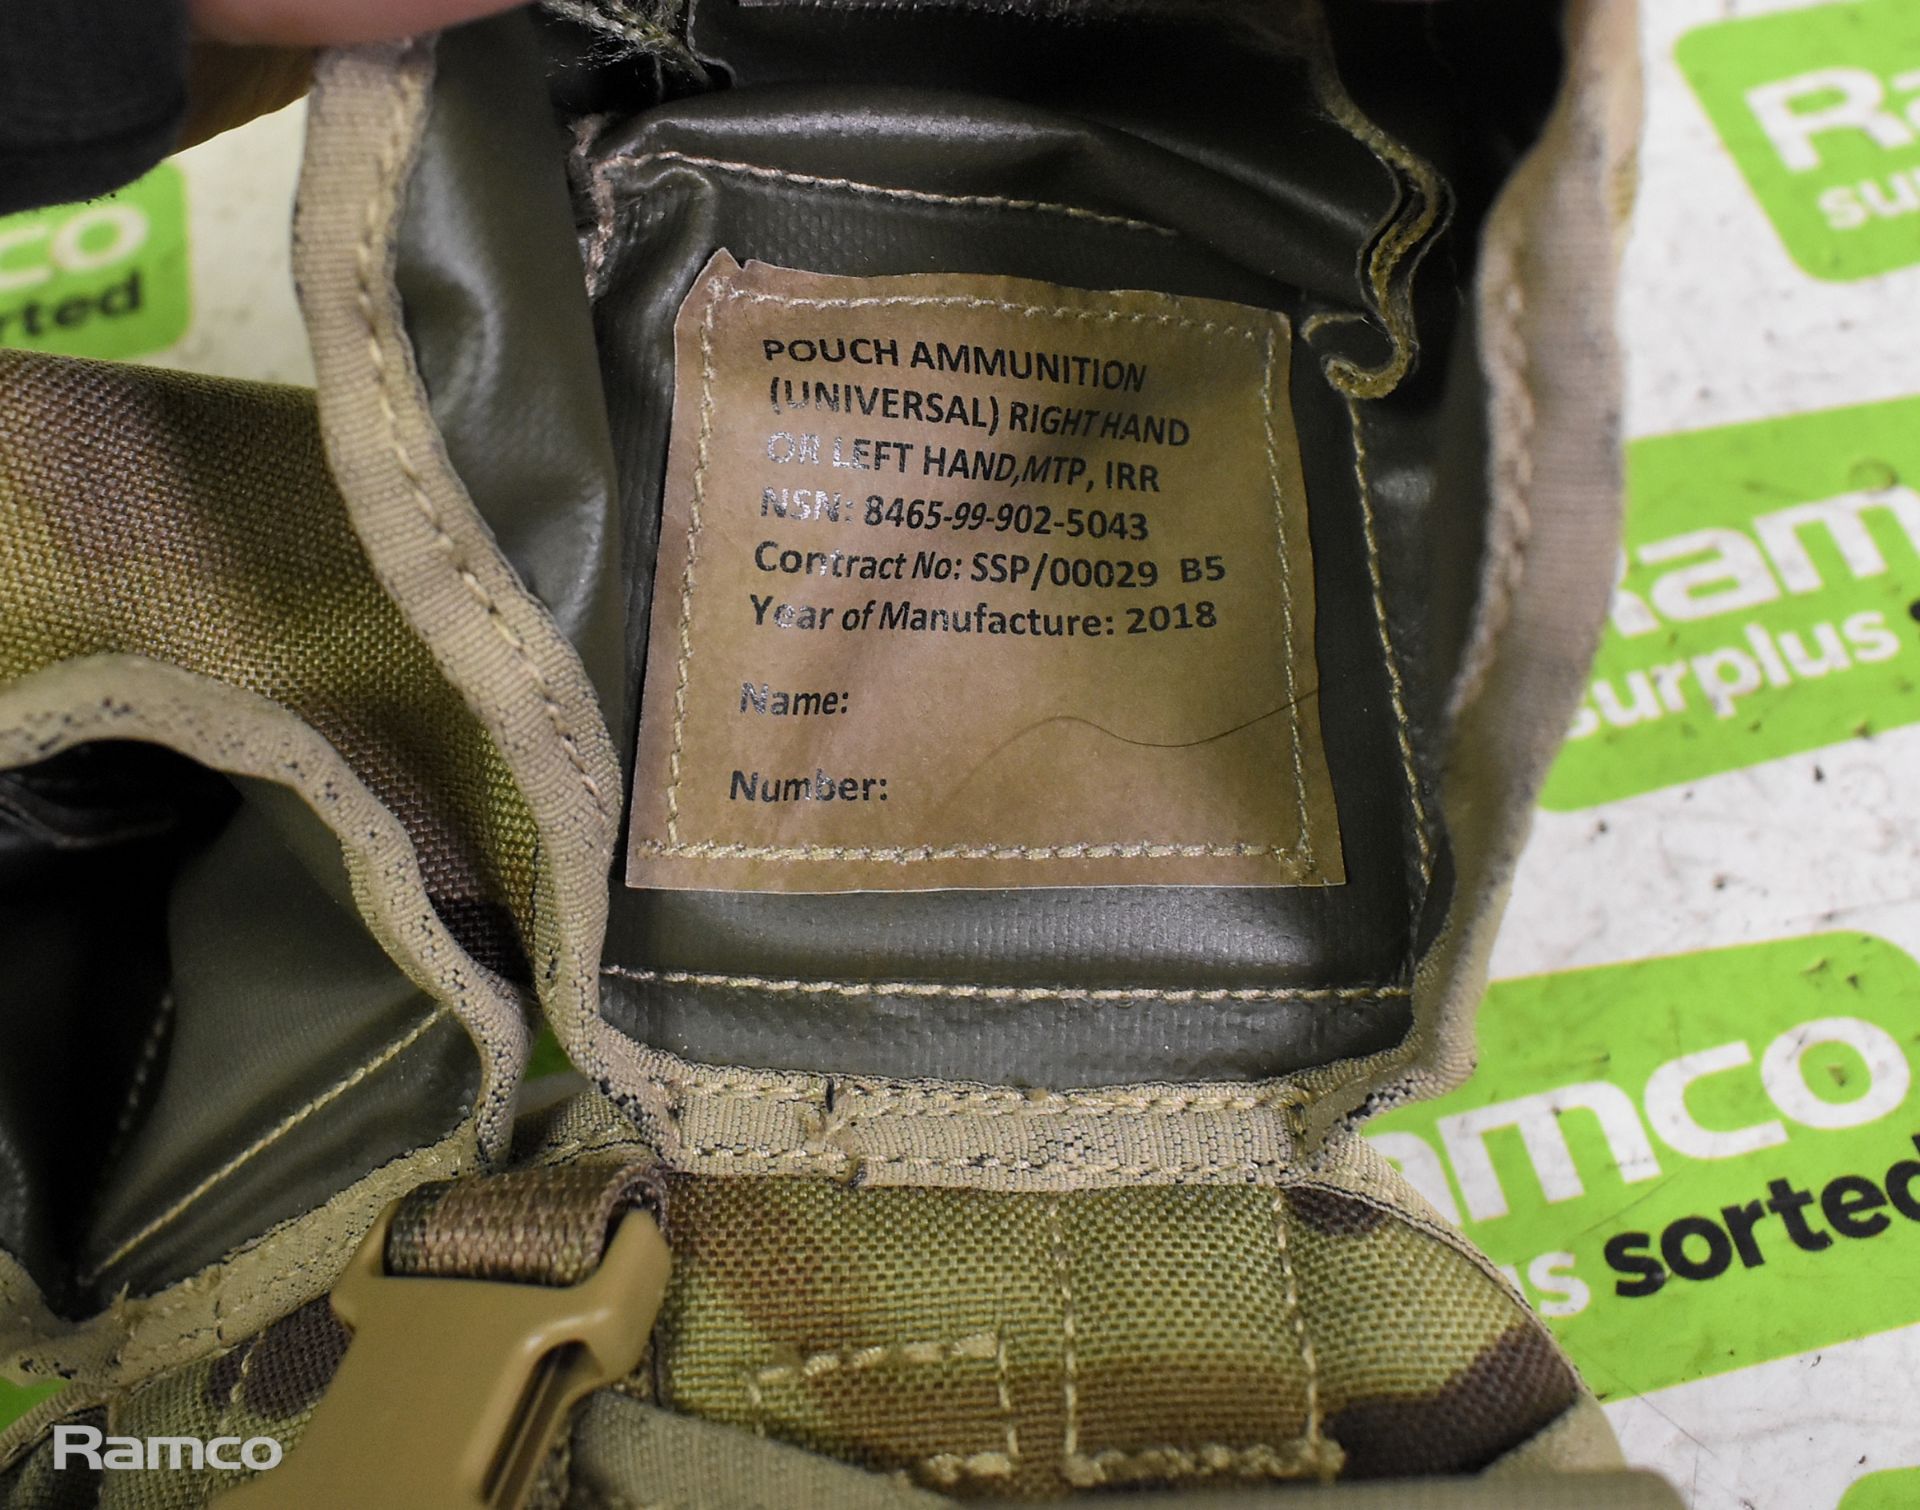 British Army body covers & ammunition pouches - see description for details - Image 11 of 16